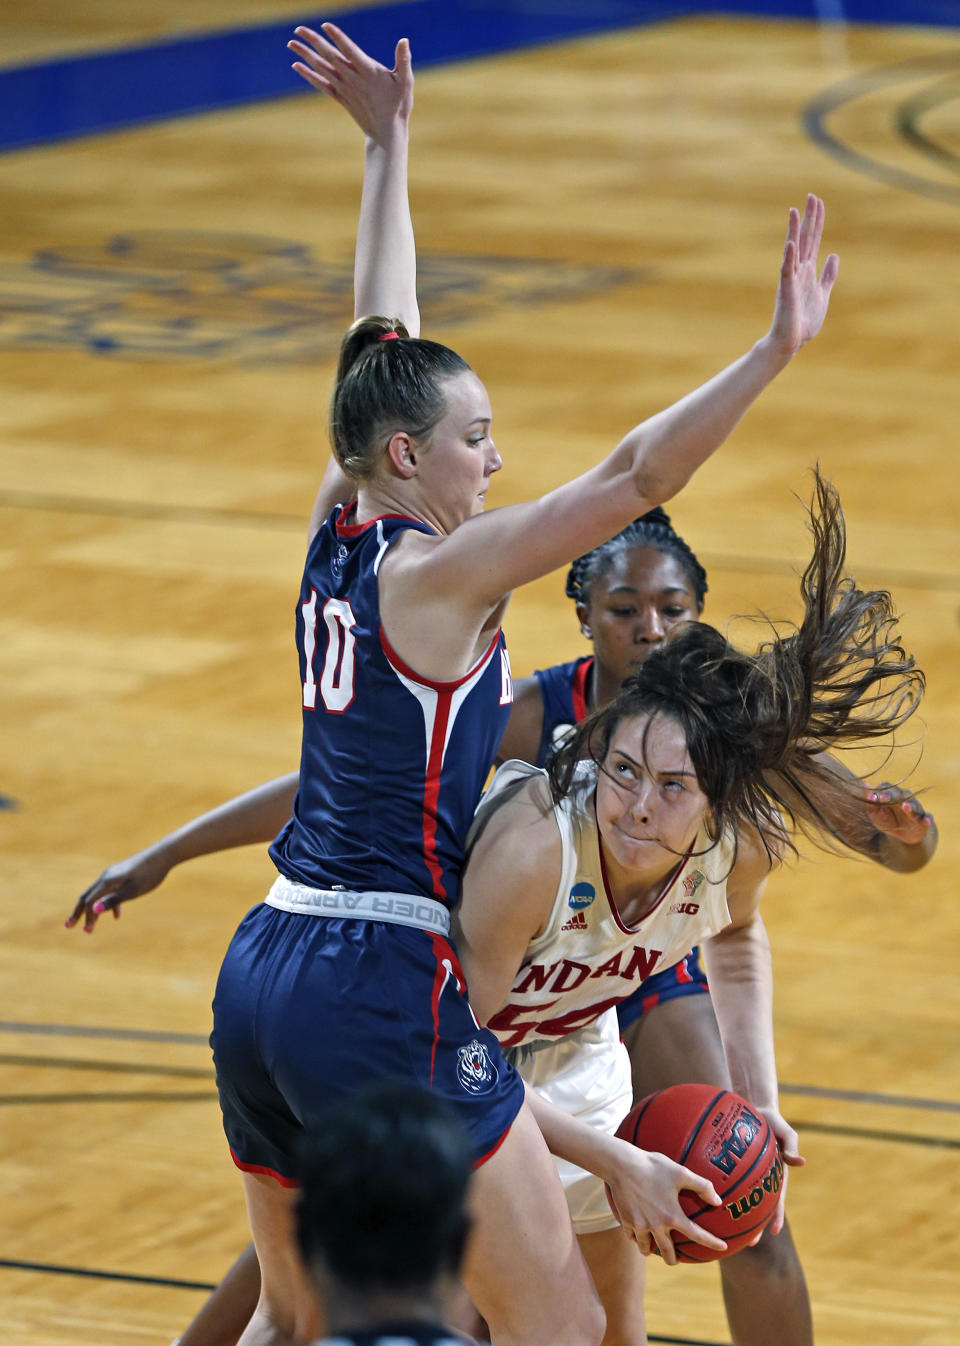 Indiana forward MacKenzie Holmes (54) drives on Belmont forward Allison Luly (10) during the first half of a college basketball game in the second round of the NCAA women's tournament at Greehey Arena in San Antonio on Wednesday, March 24, 2021. (AP Photo/Ronald Cortes)